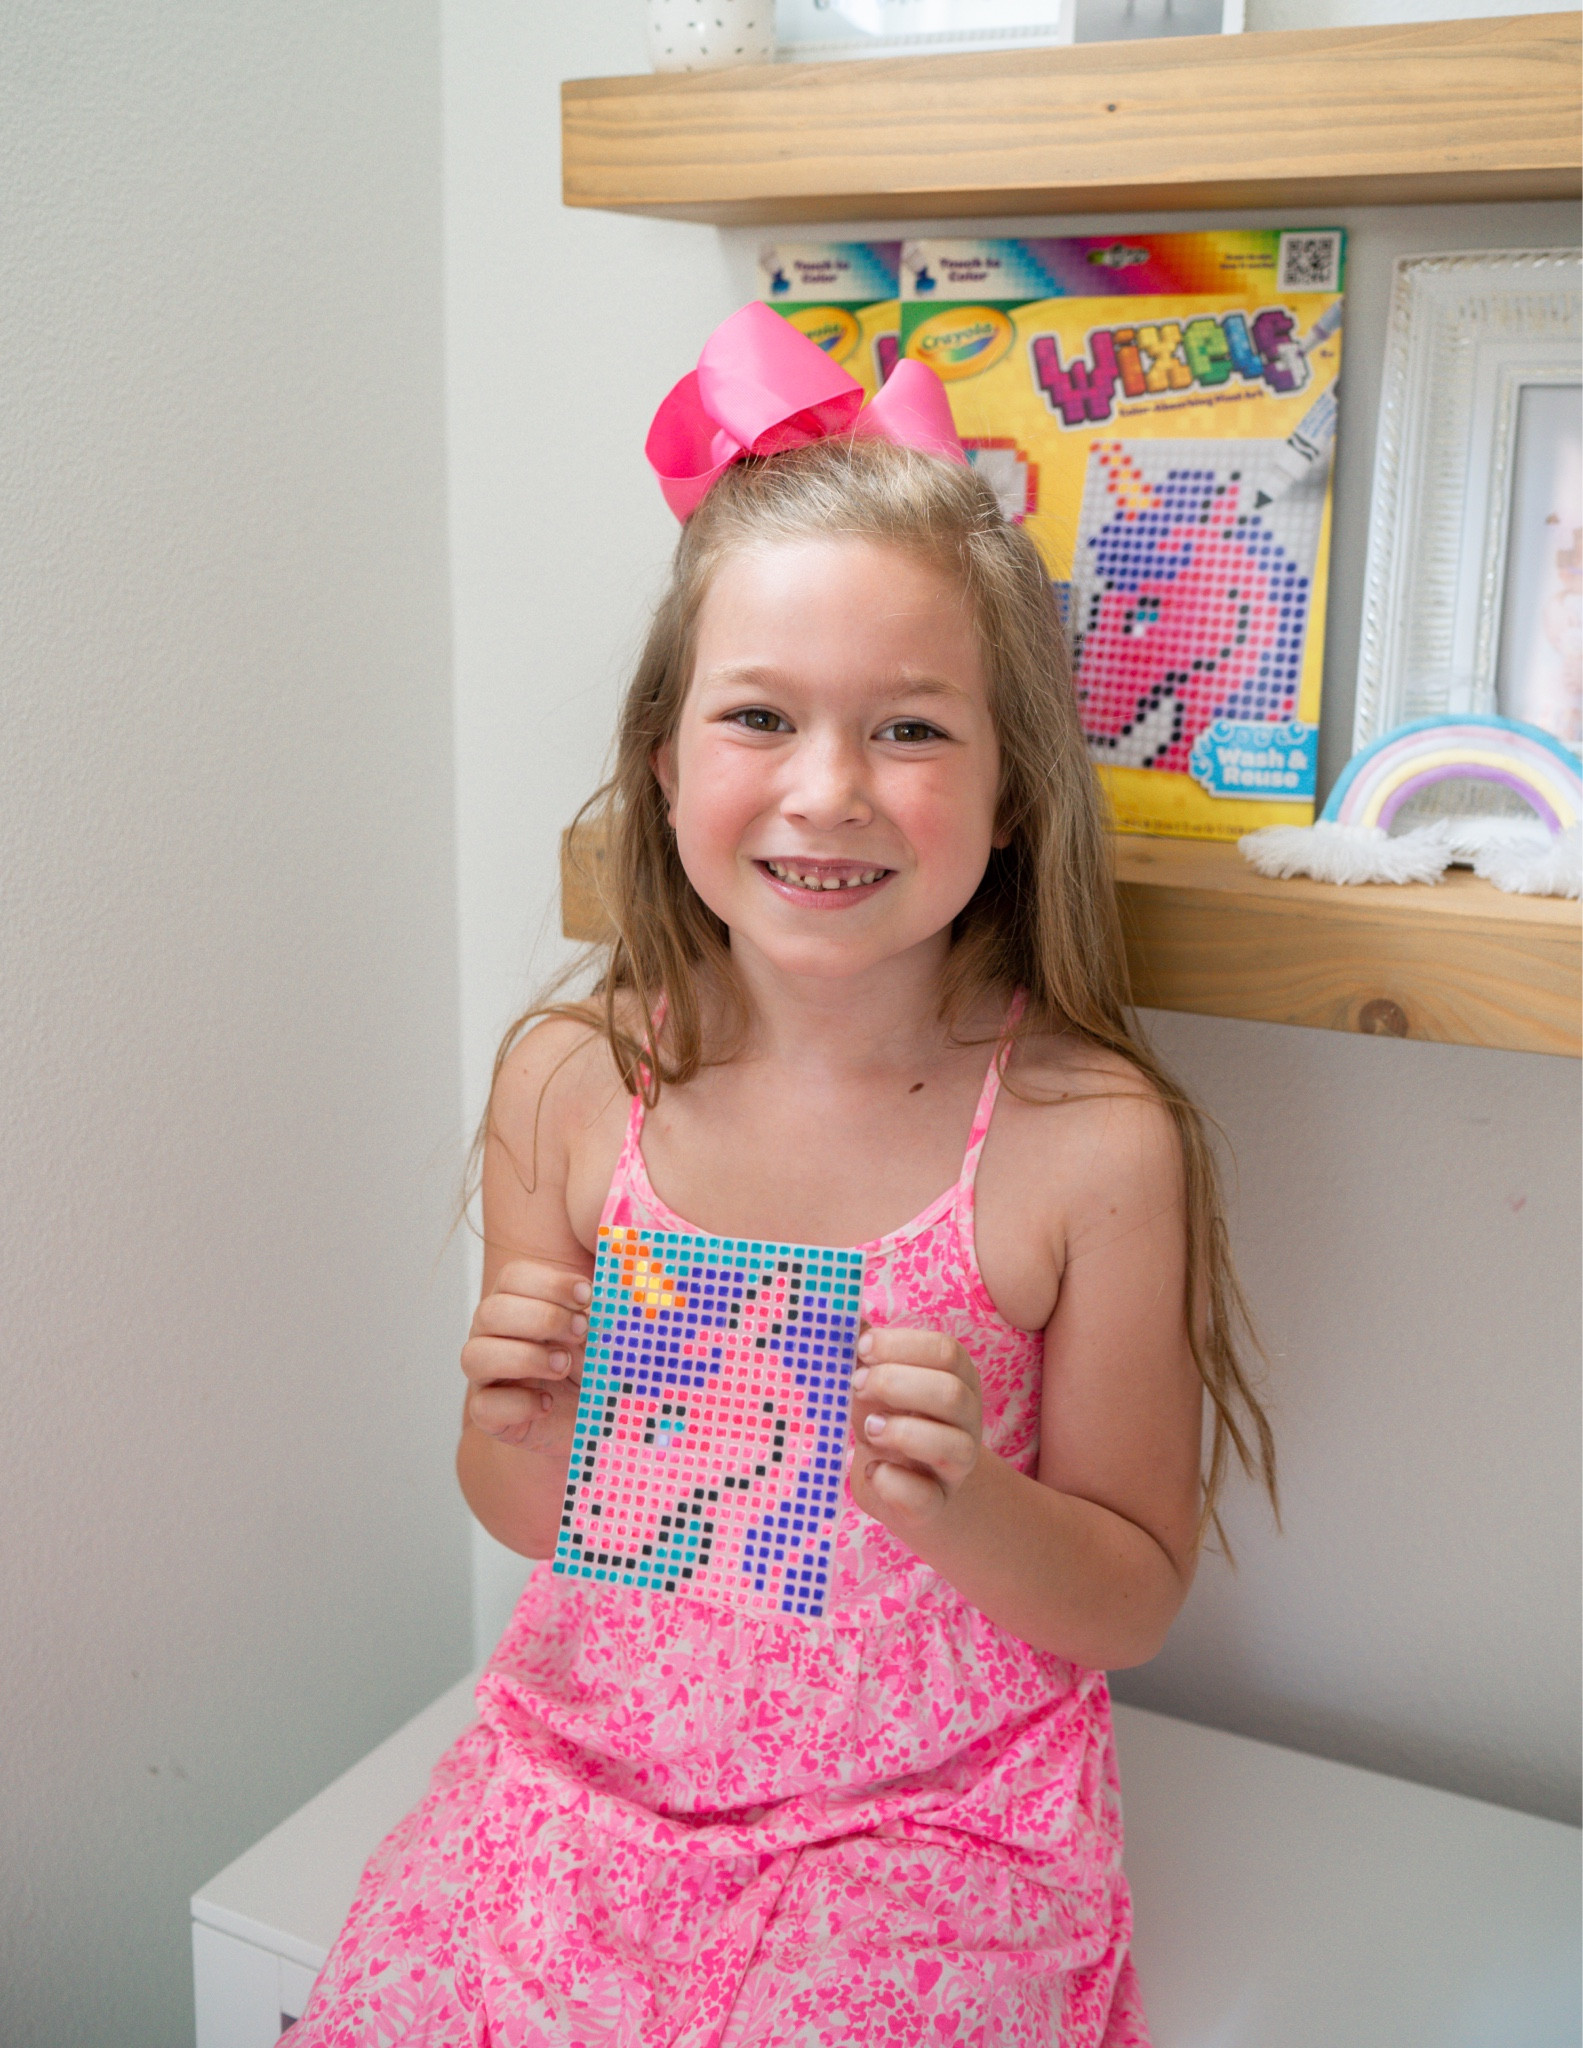 ad @crayola Wixels is a fun, innovative way for kids to create